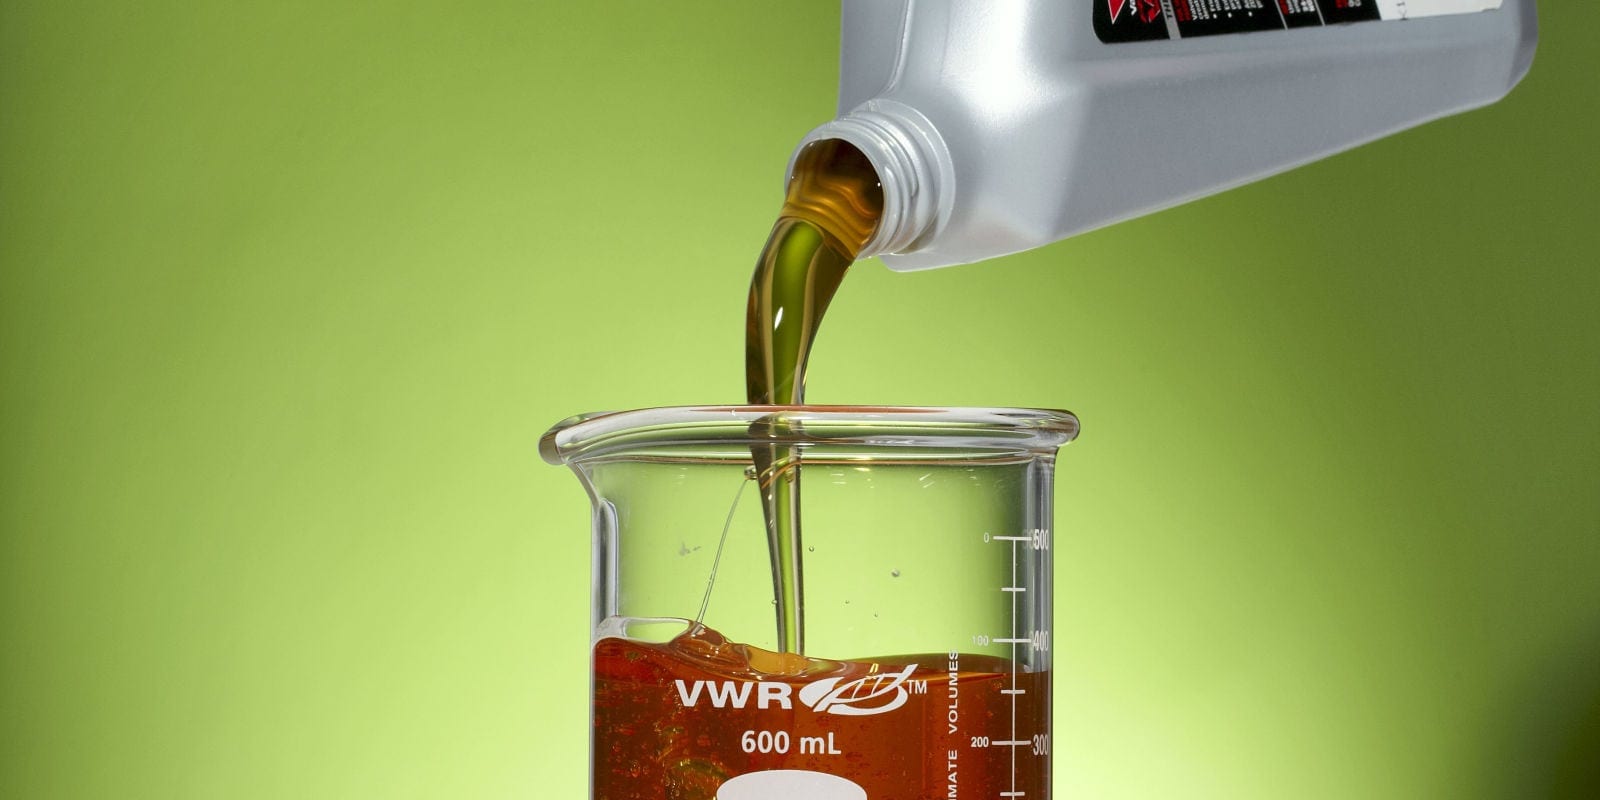 is there a lab who can test the viscosity of motor oil